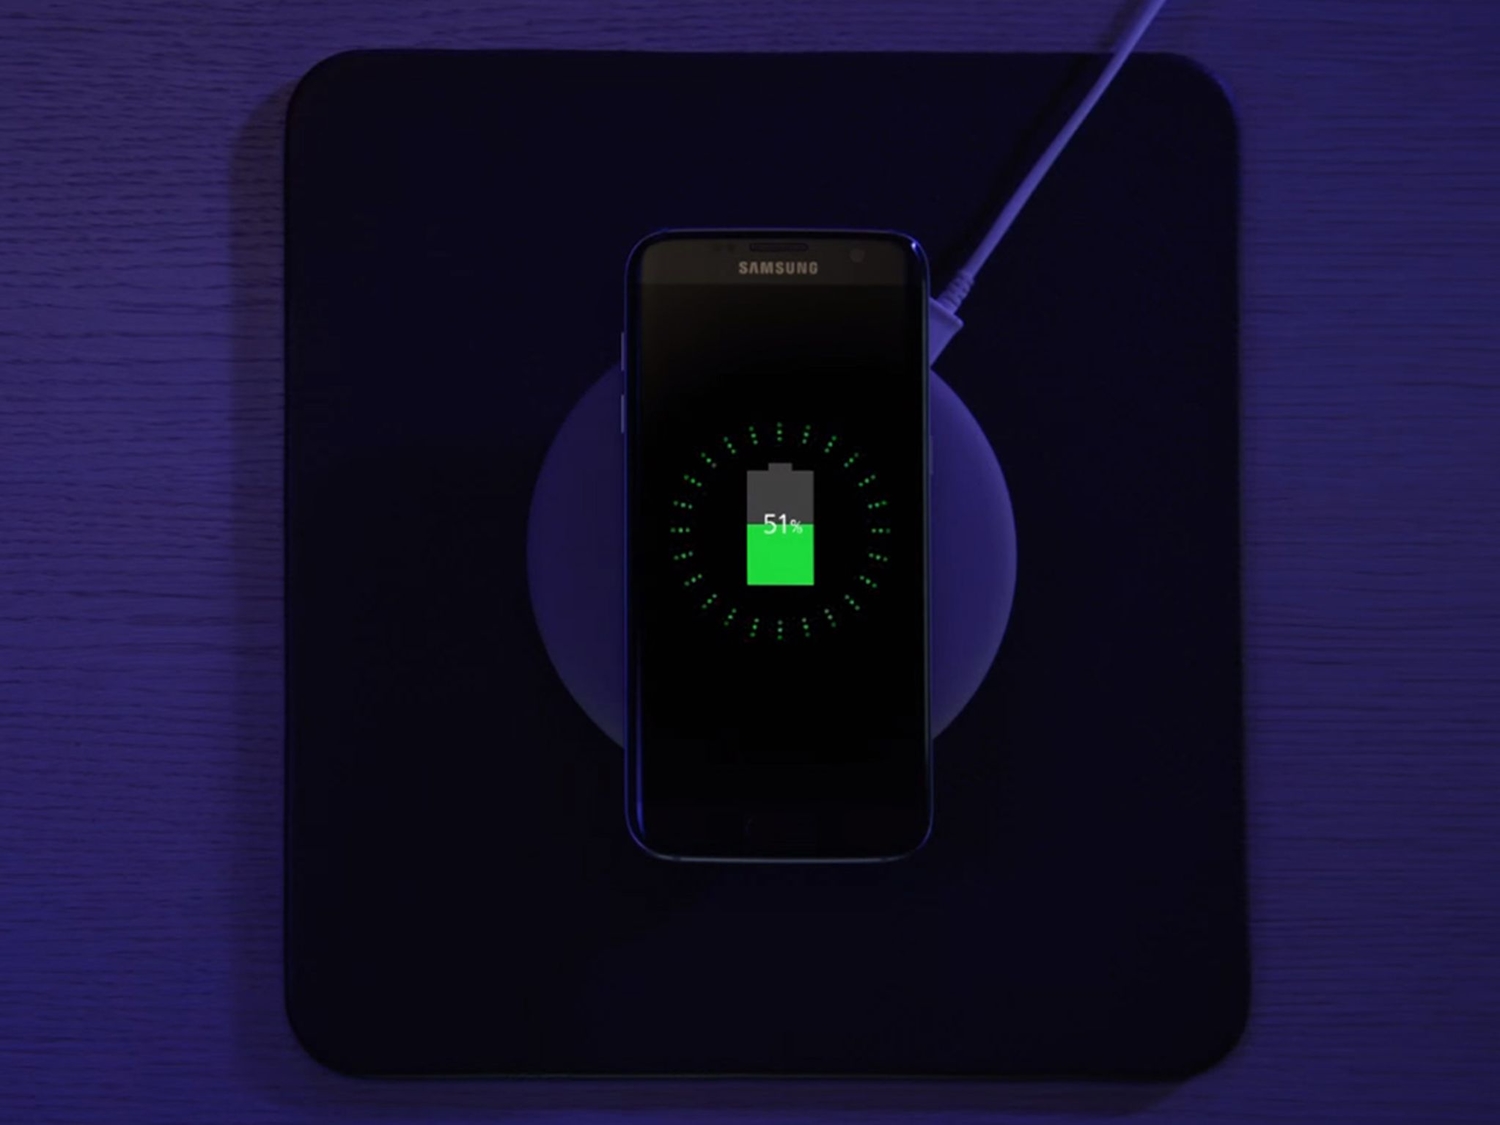 A Samsung phone with a lithium-ion battery charging on a wireless charging pad.